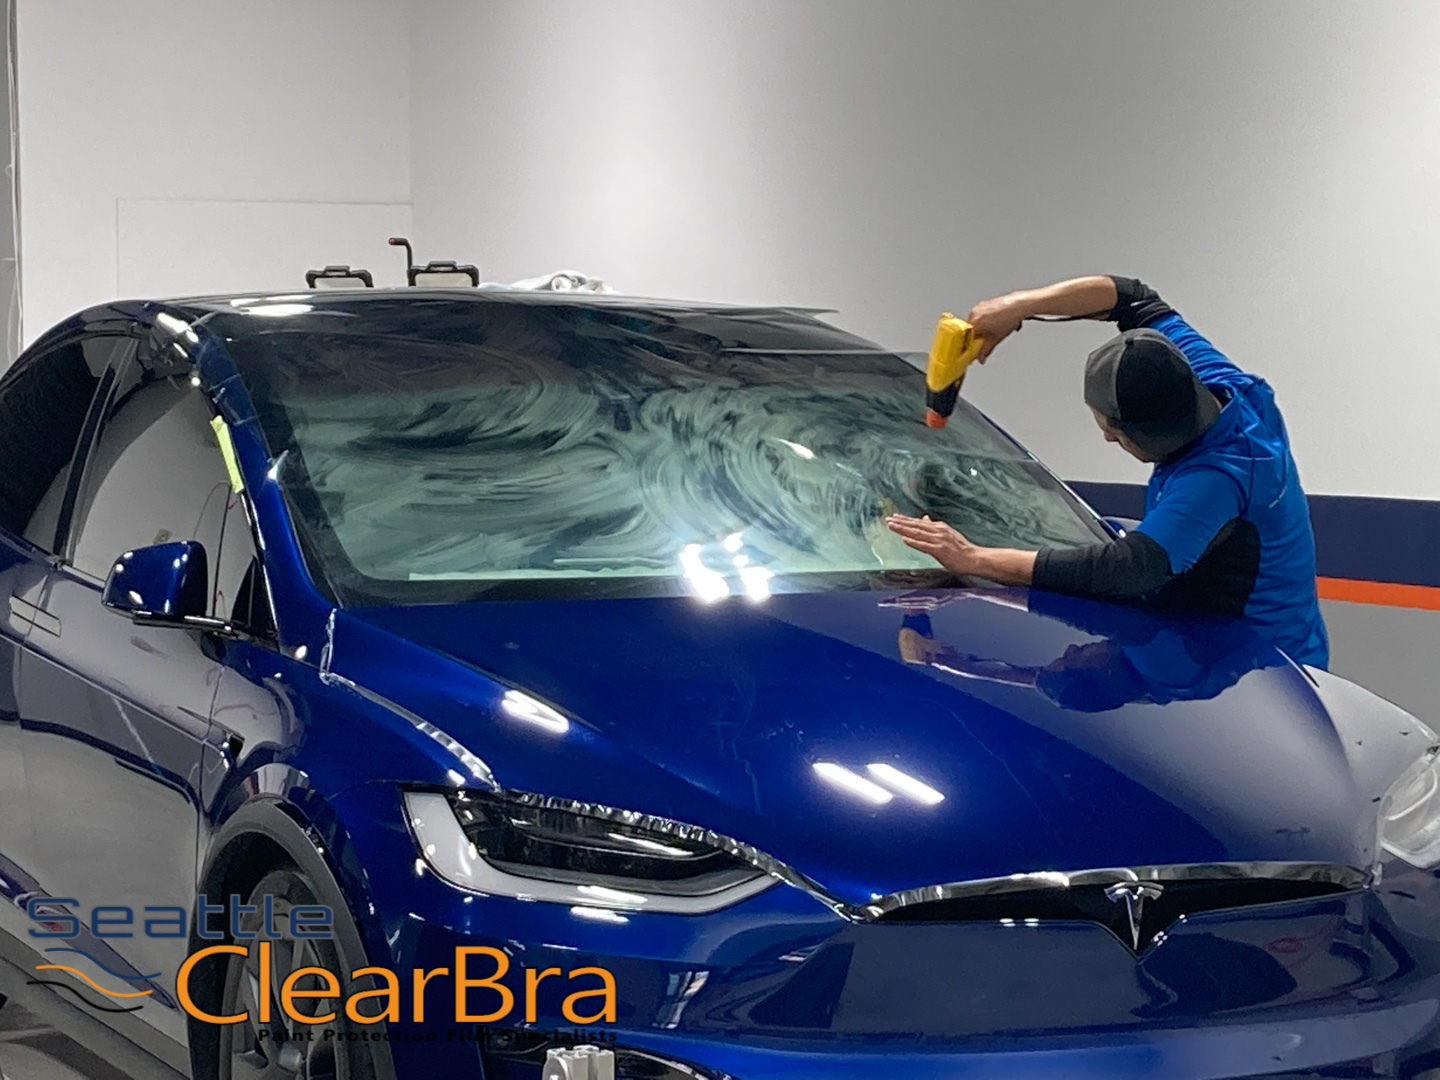 Paint Protection Film: Xpel, Ish Window Tint